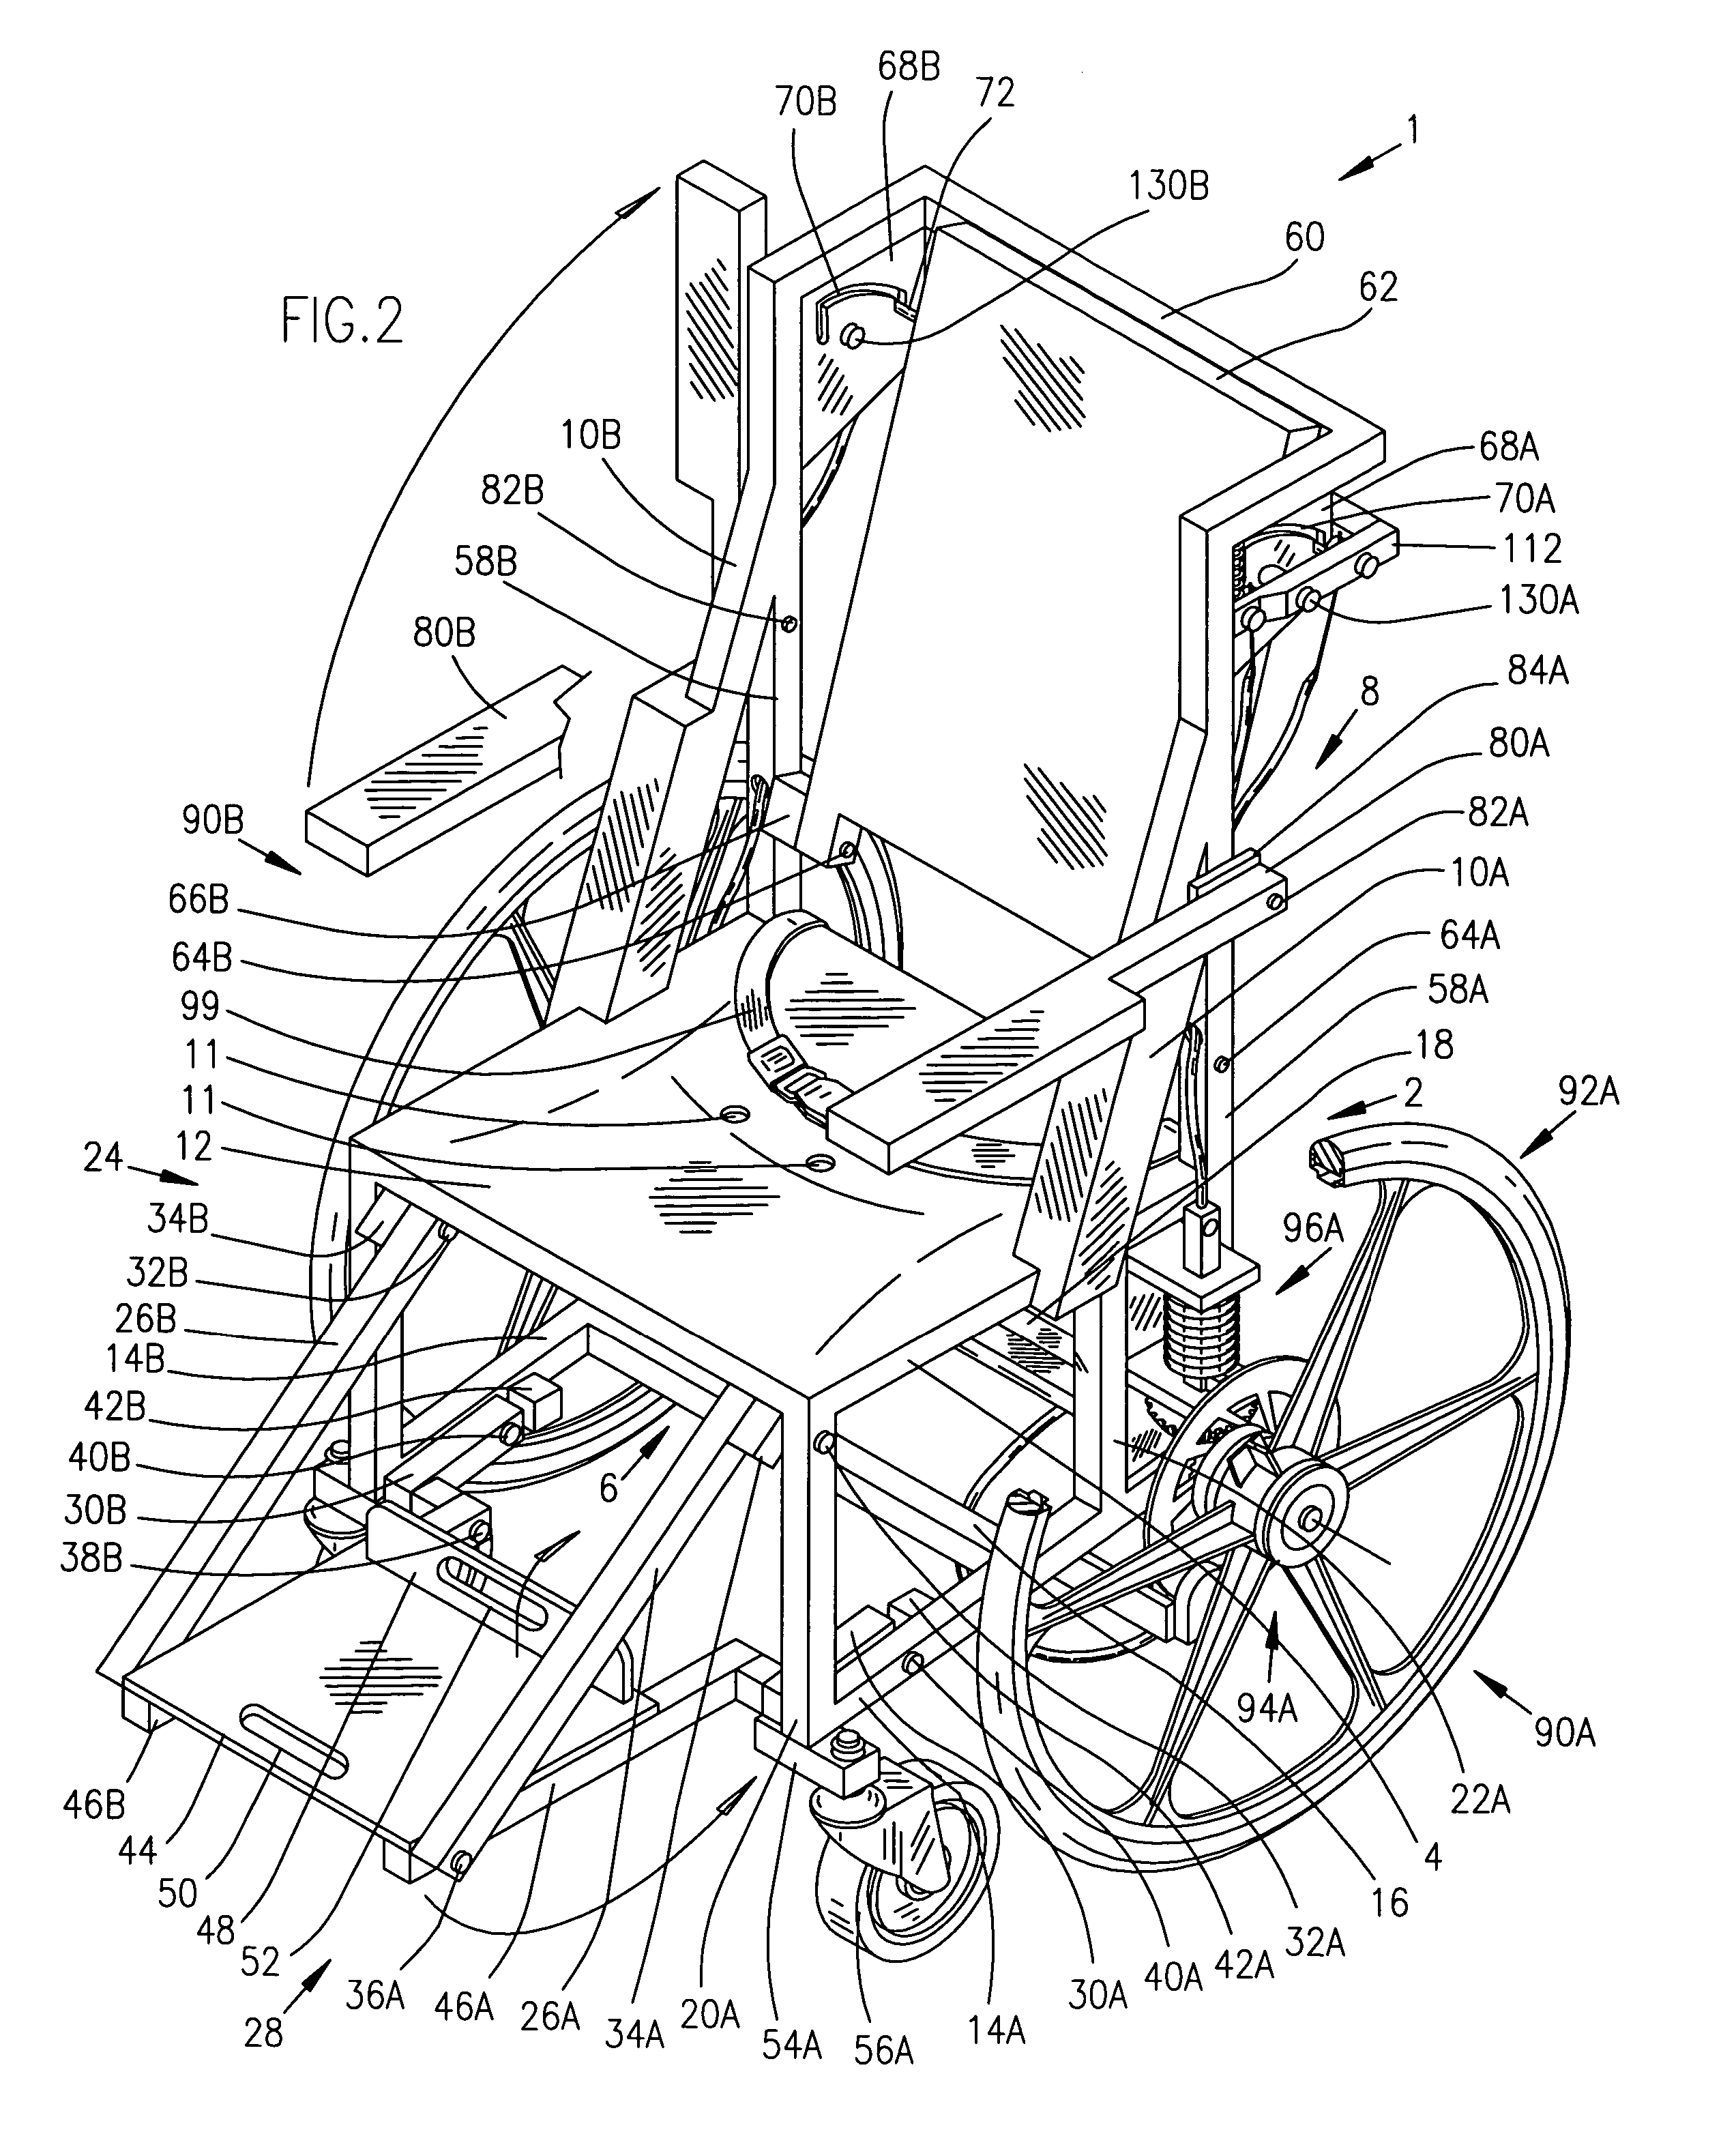 Assistive mobility device